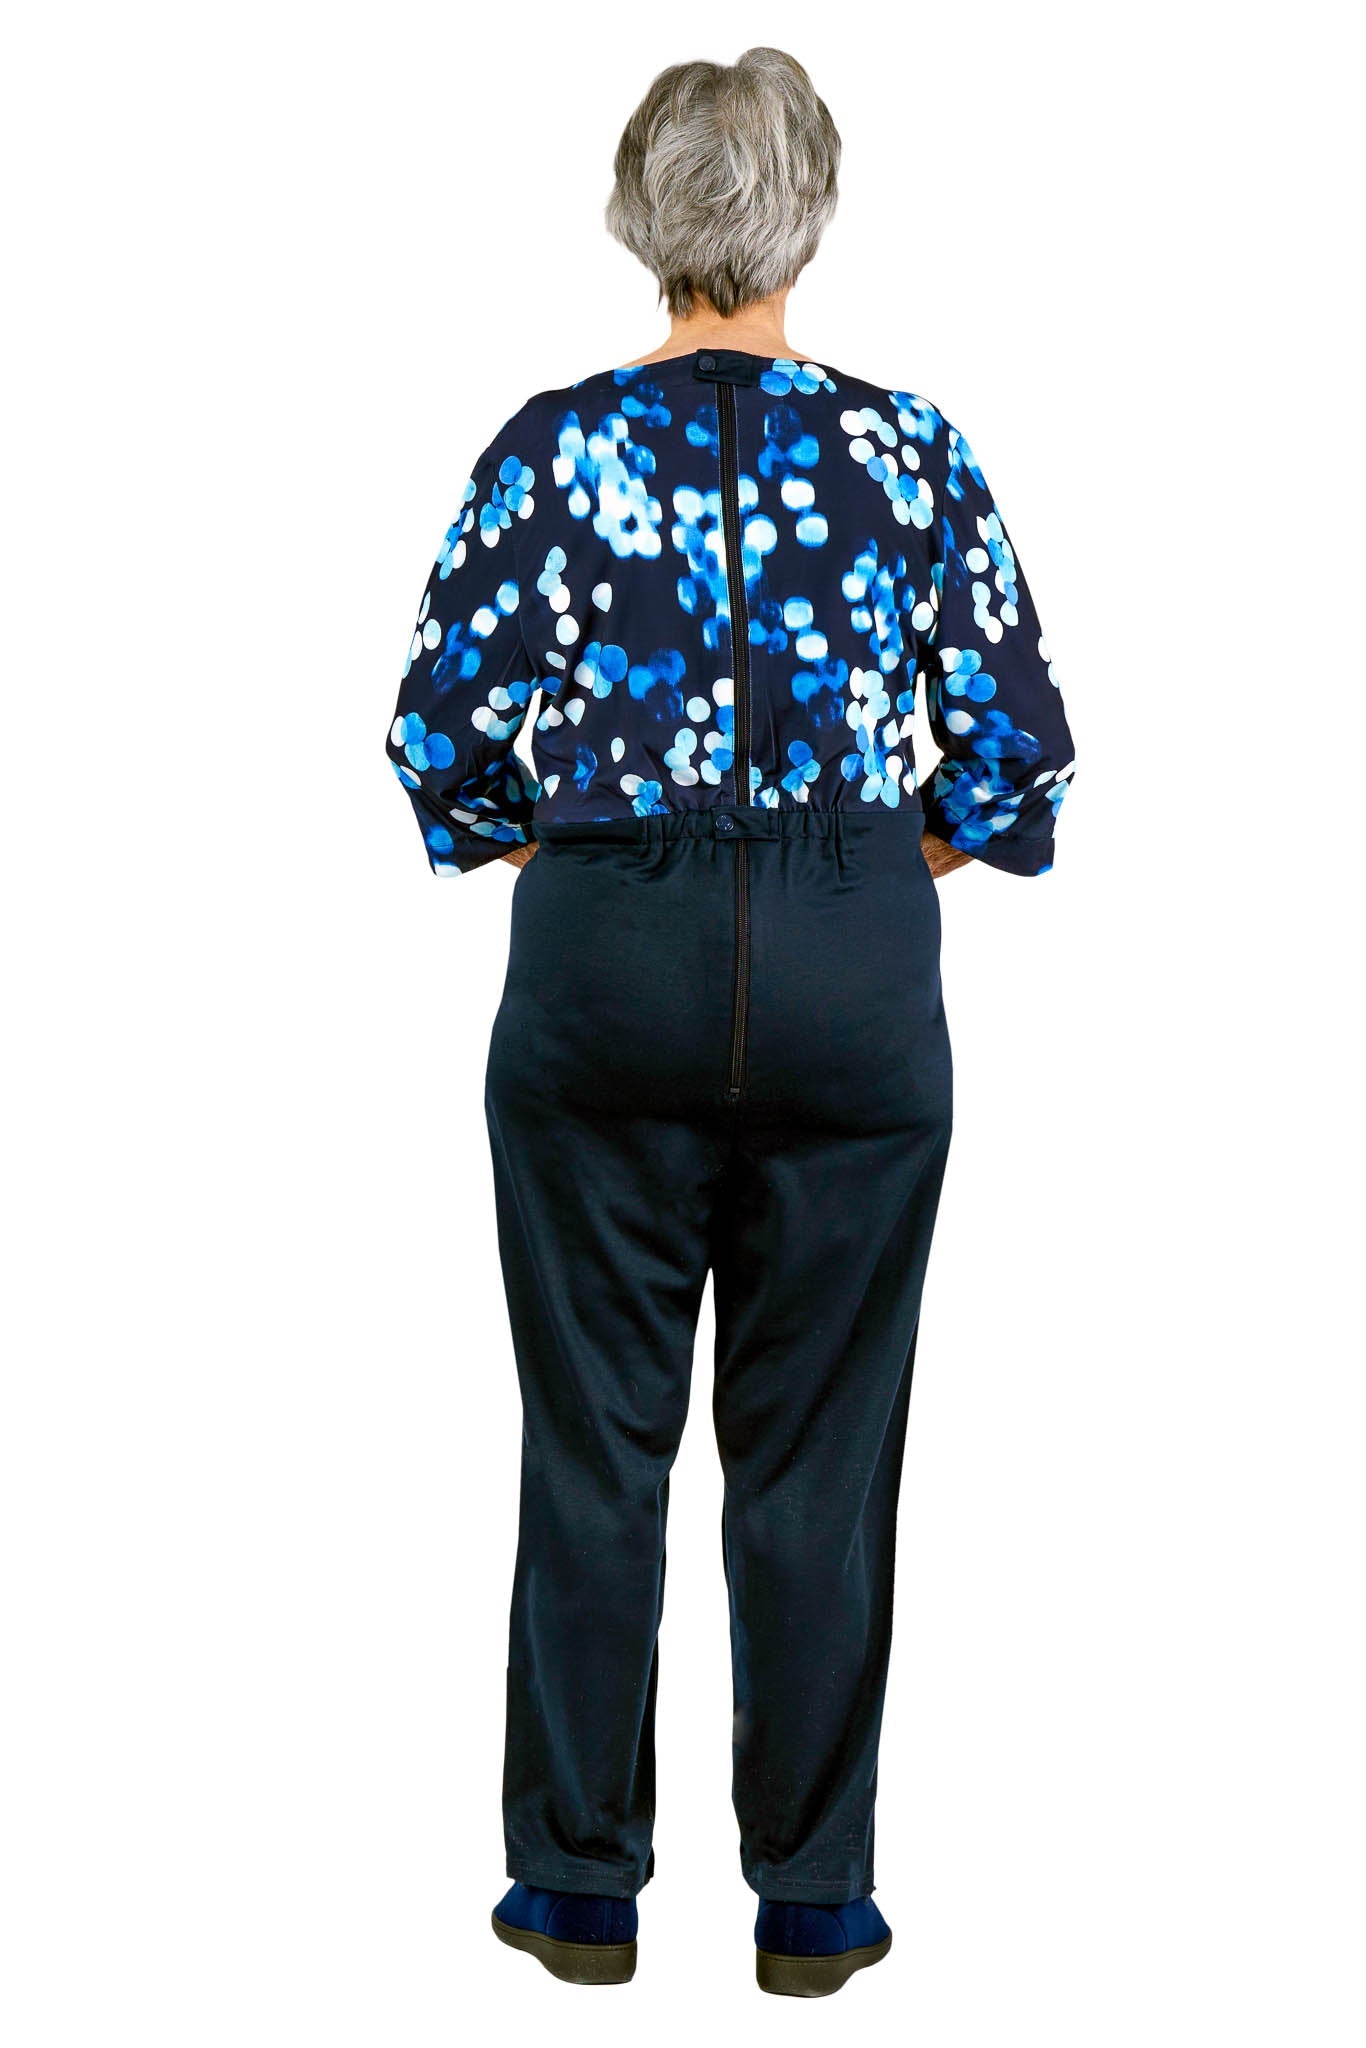 Anti-Strip Jumpsuit for Adult Women | Art in Aging